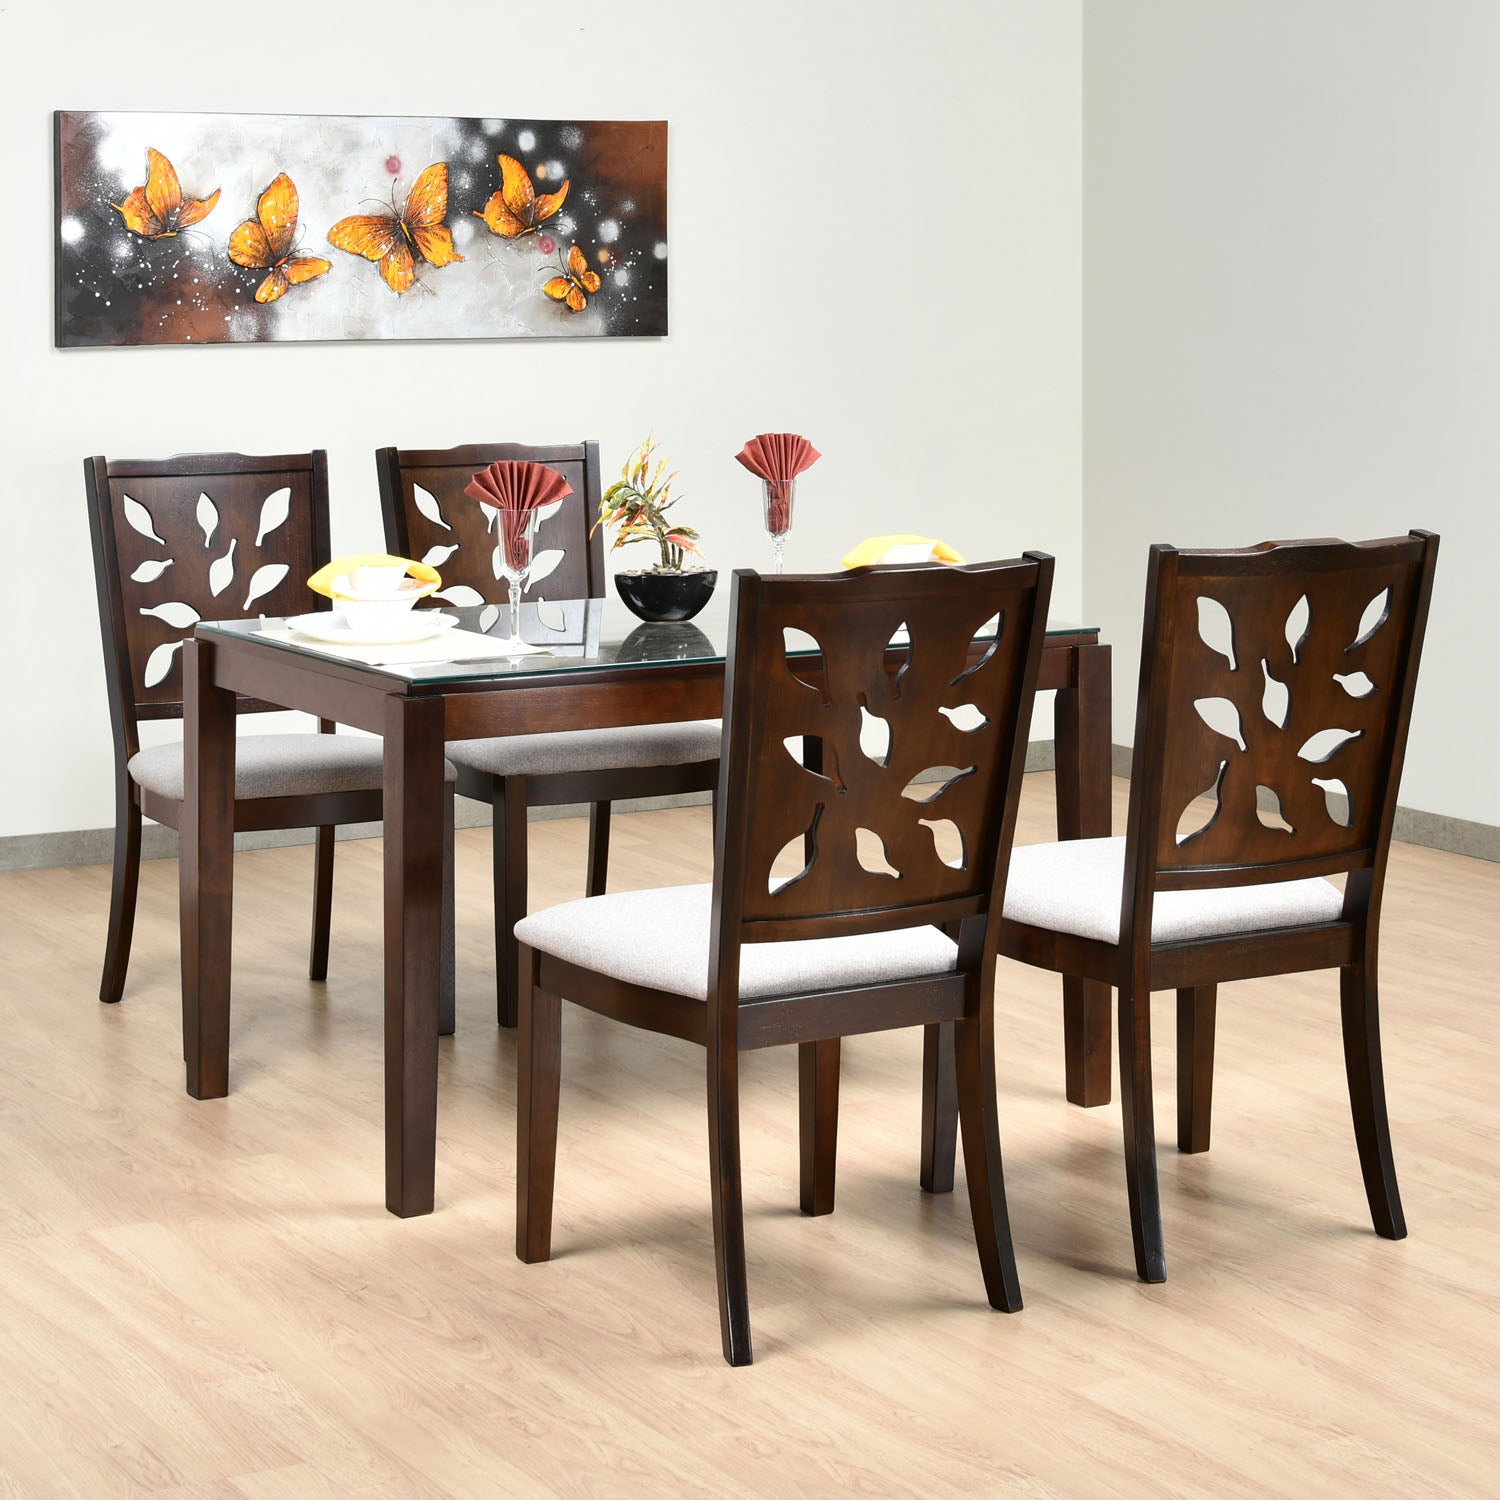 Square 4 Seater Dining Table Outlet Online, Save 66% | jlcatj.gob.mx